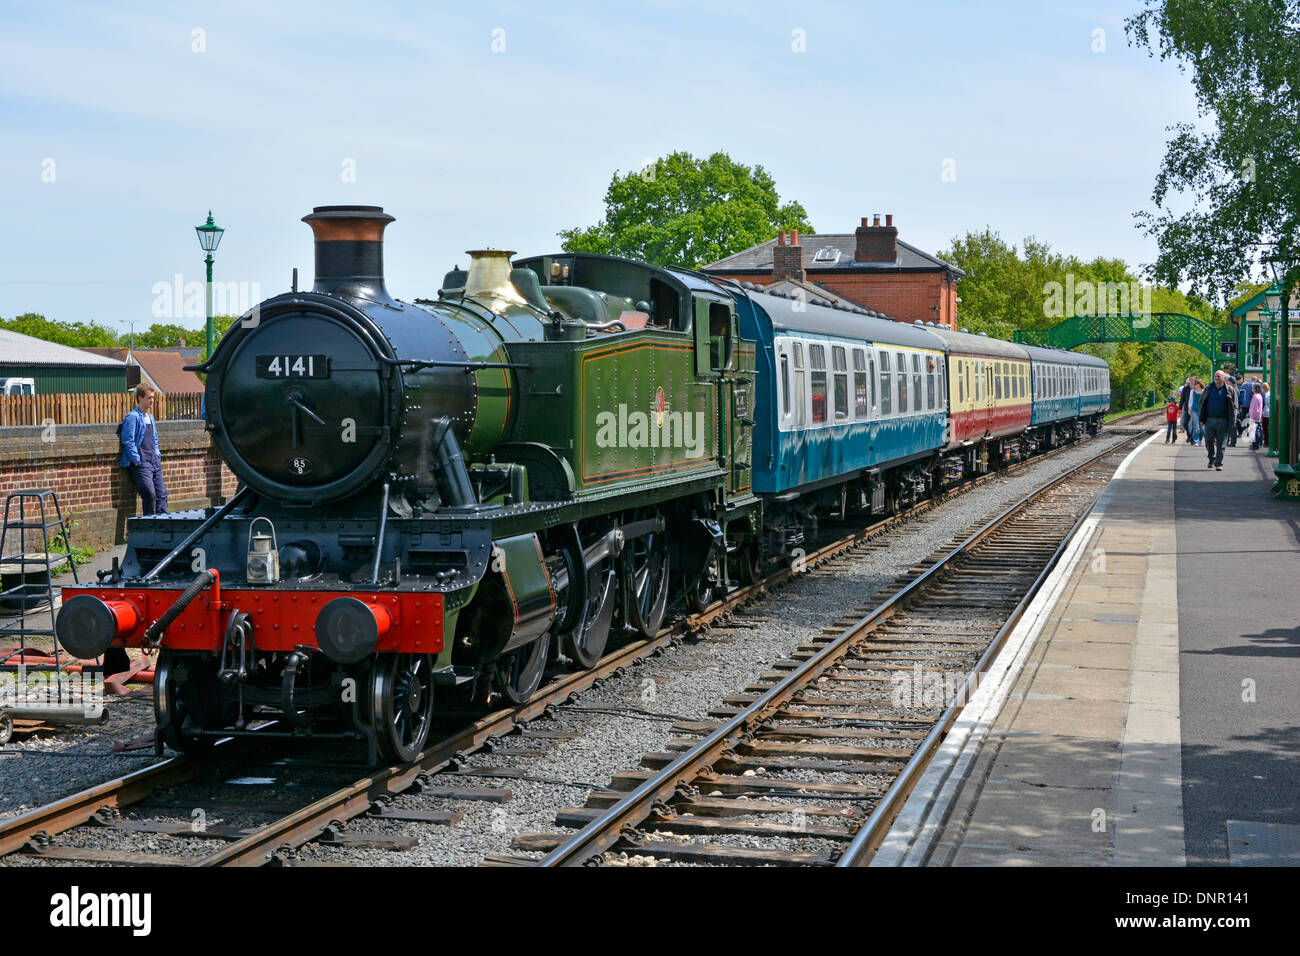 Steam tank engine locomotive 4141 & passenger train at platform on Epping and Ongar preserved heritage railway at North Weald station Essex England UK Stock Photo